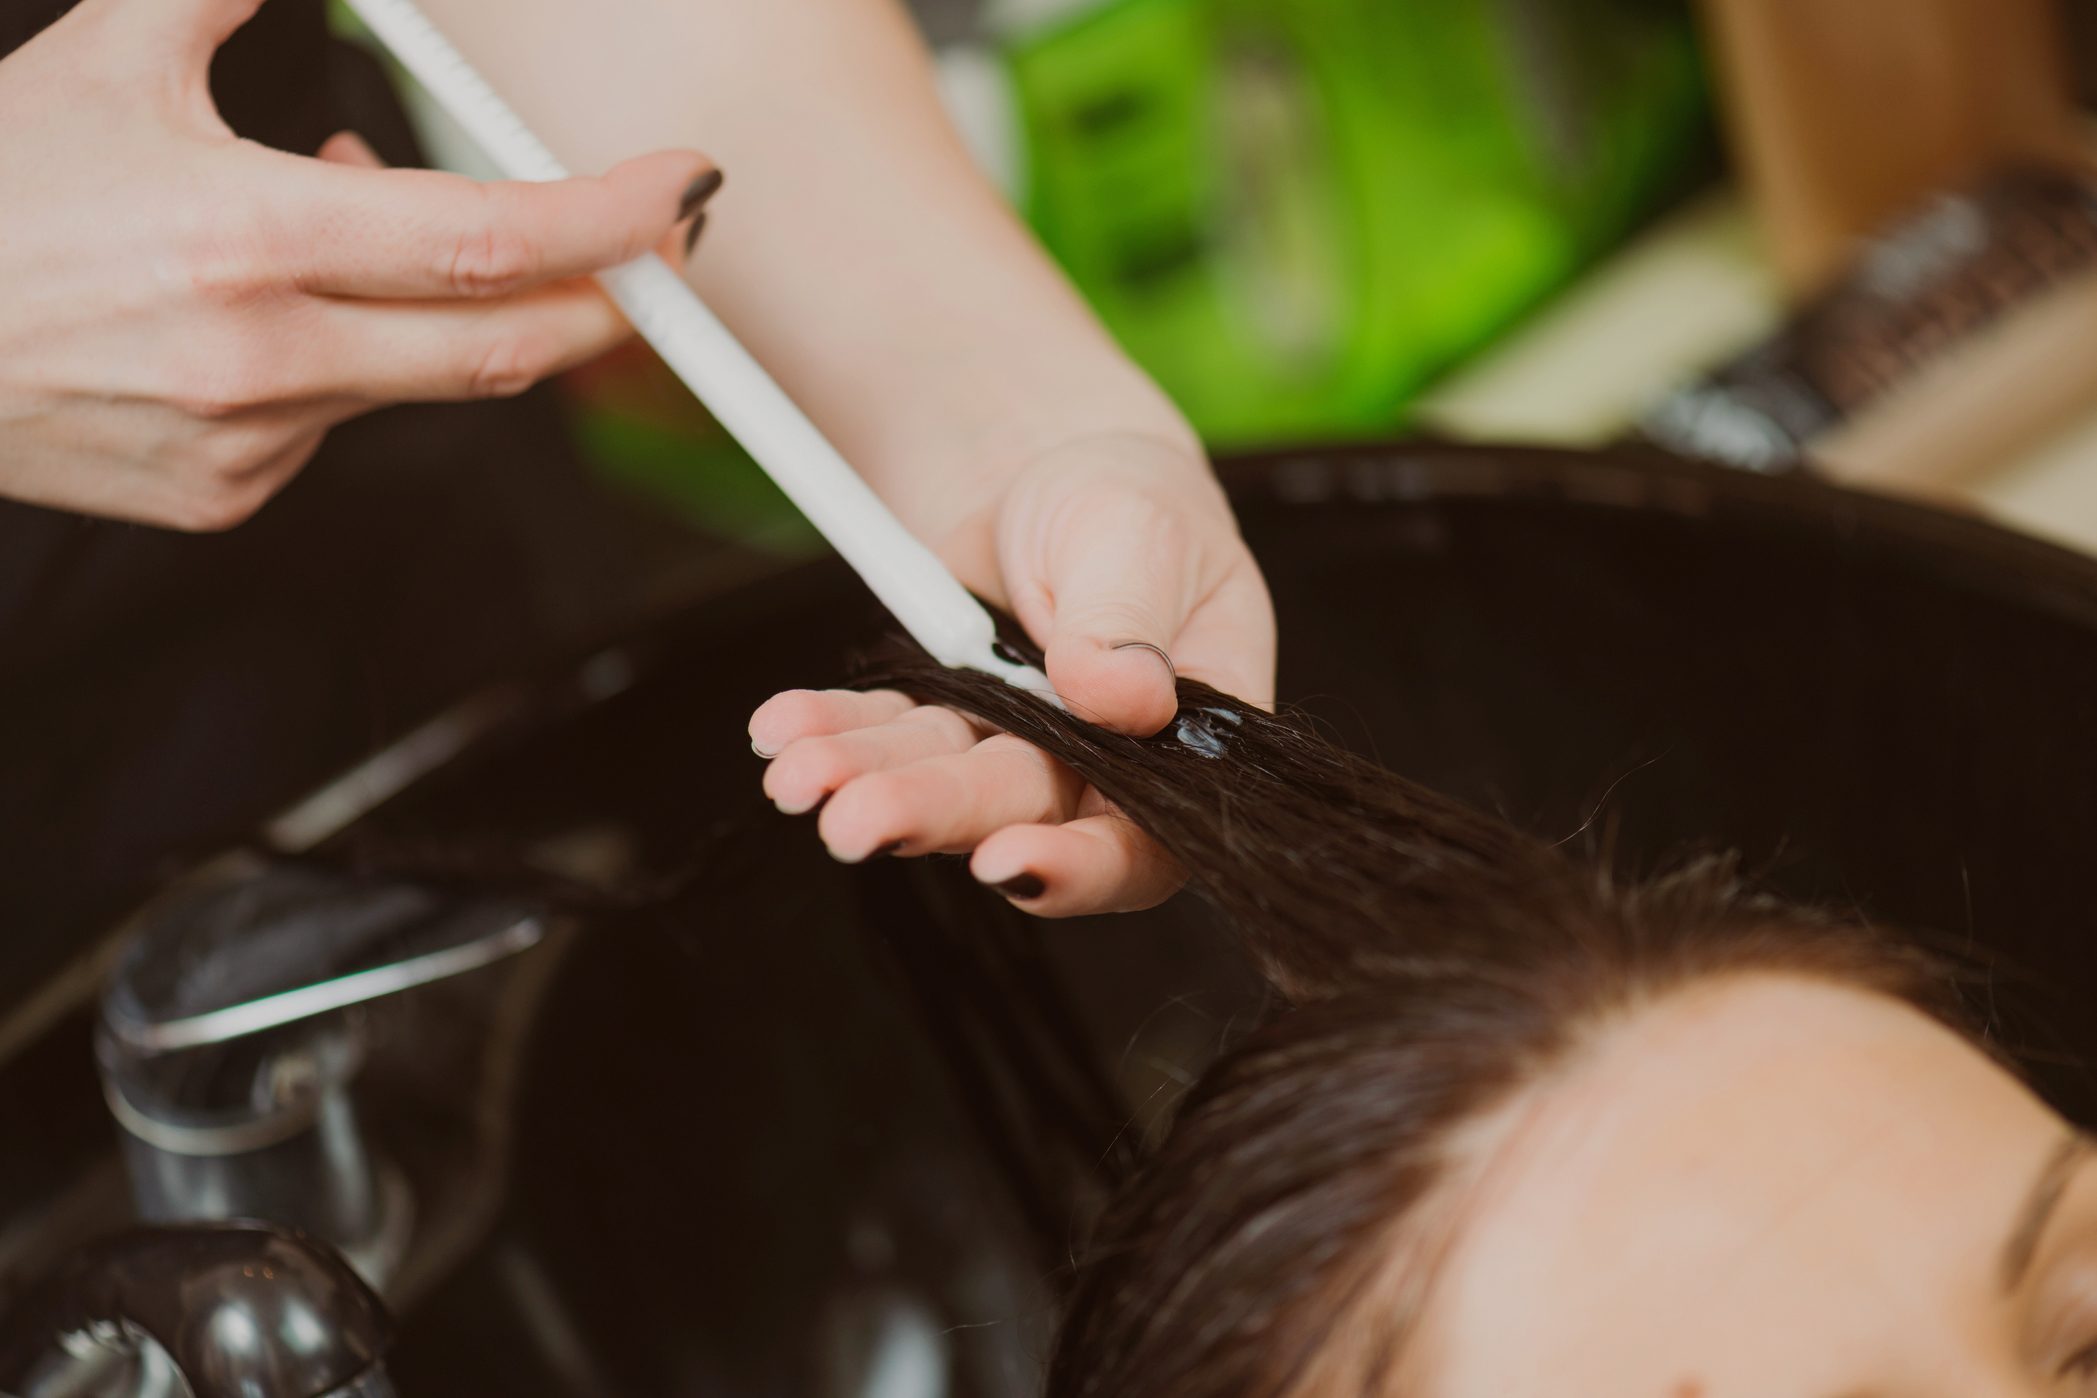 Hair Botox: Treatment Benefits, Cost, and More | The Healthy